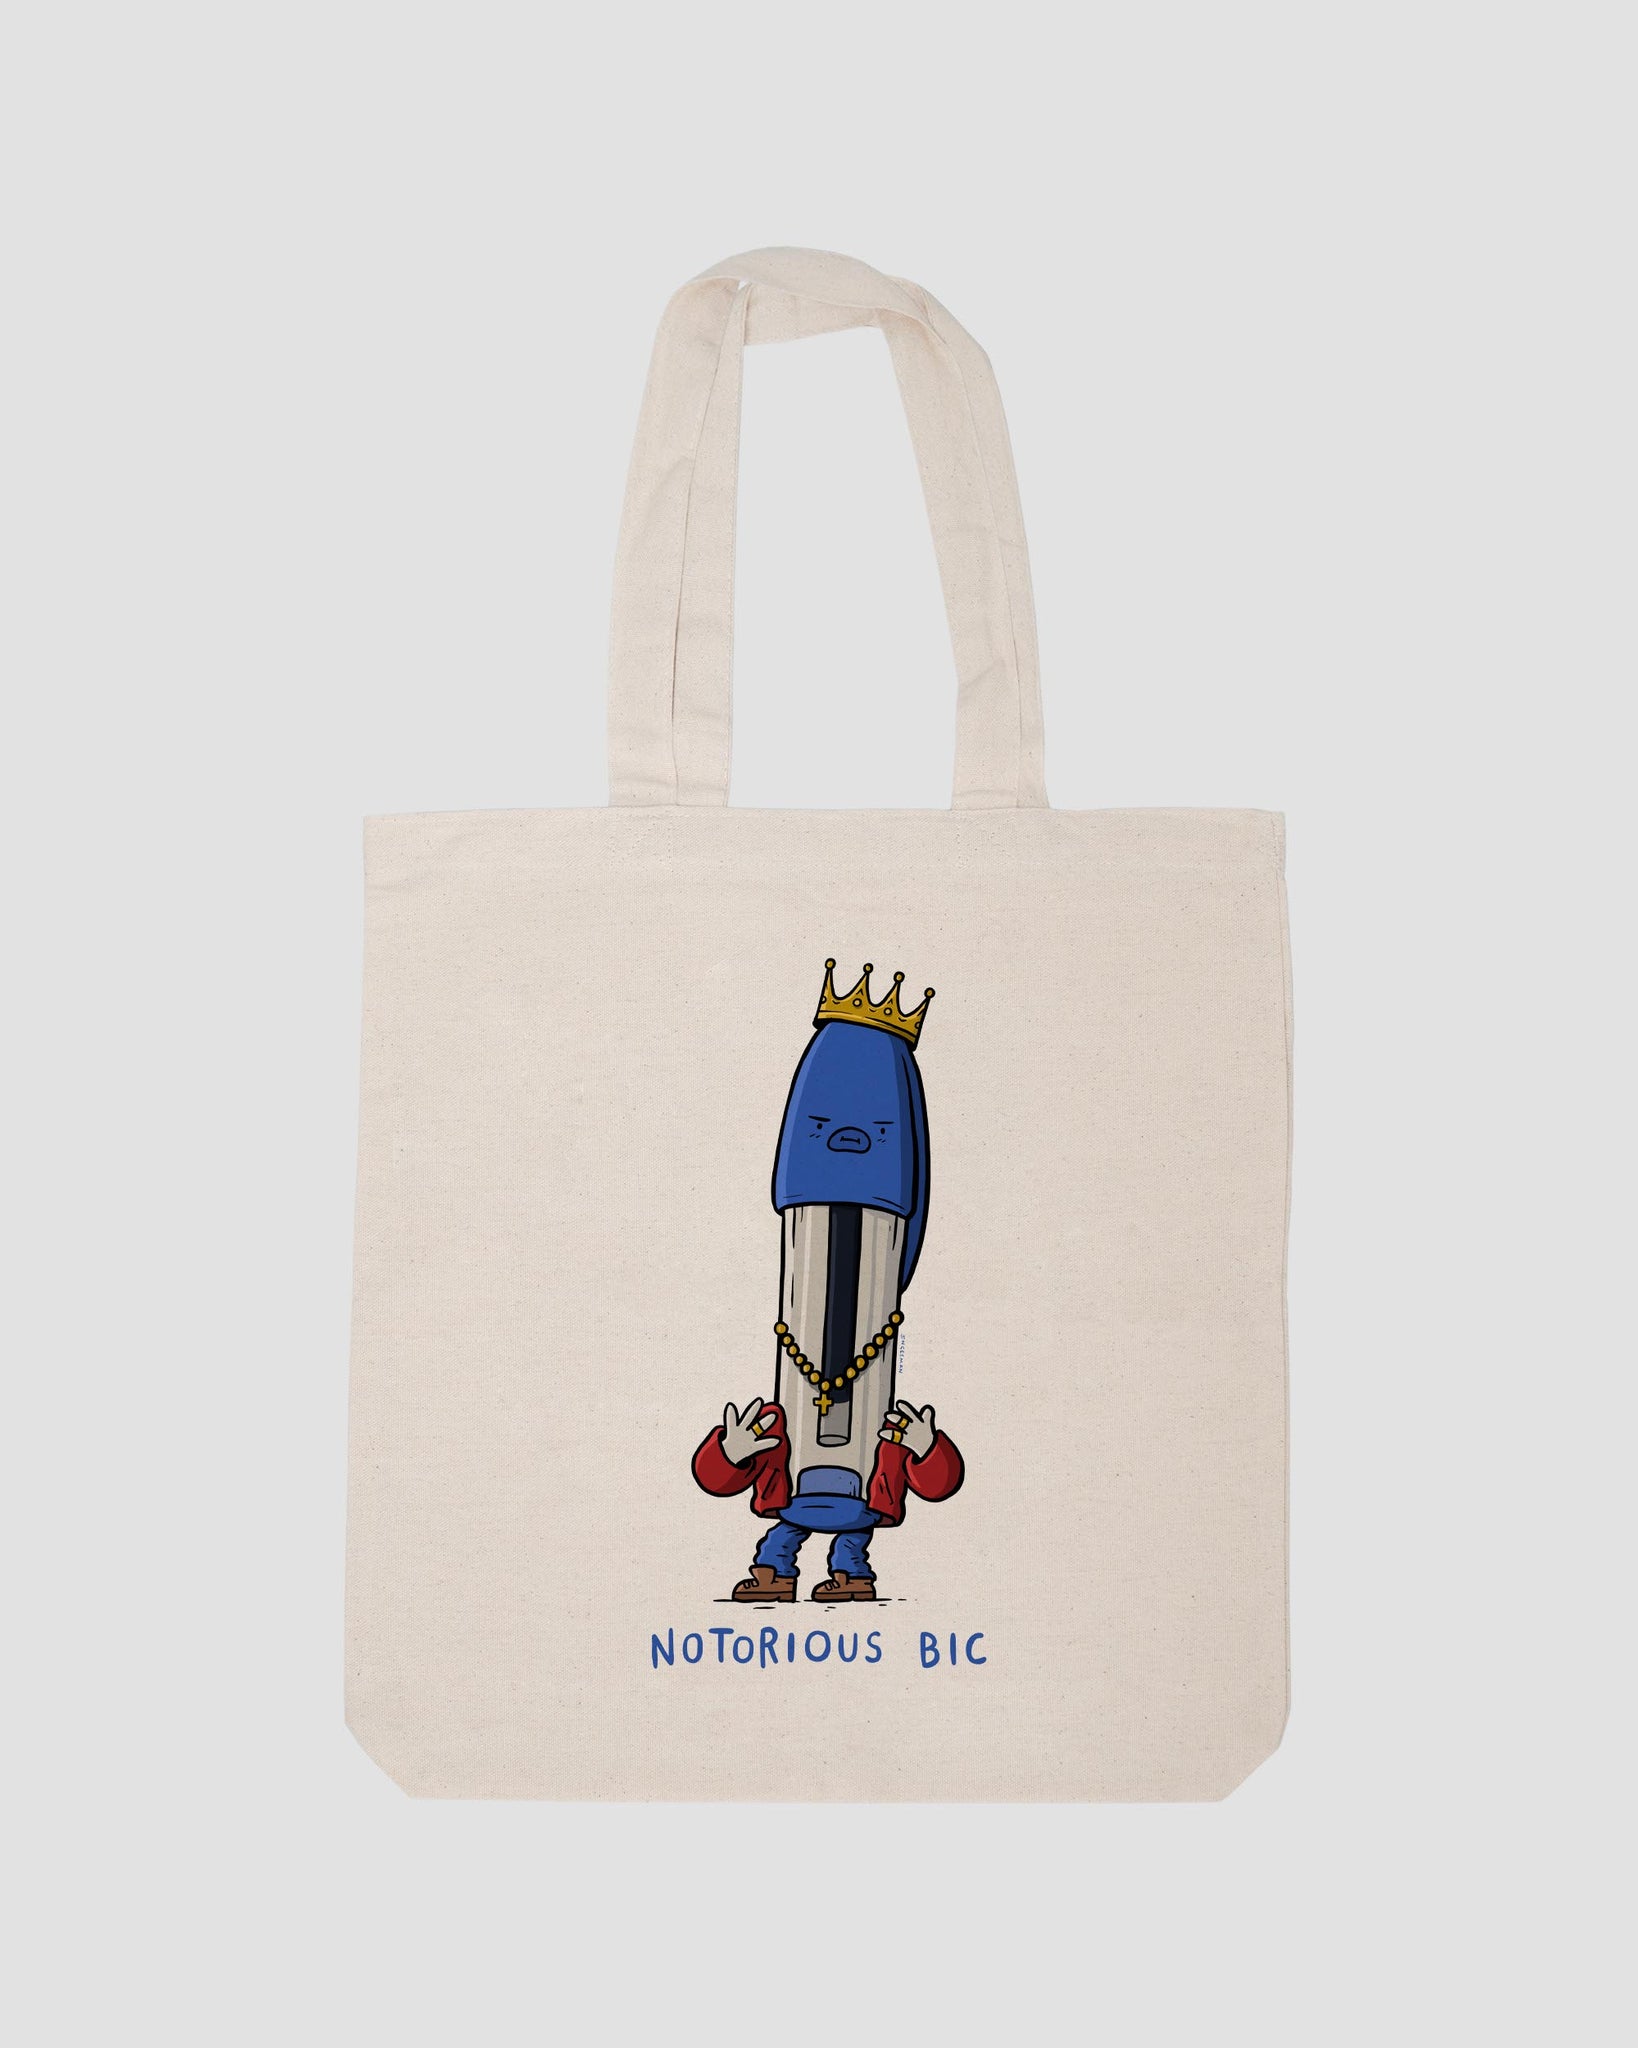 NOTORIOUS BIC TOTE